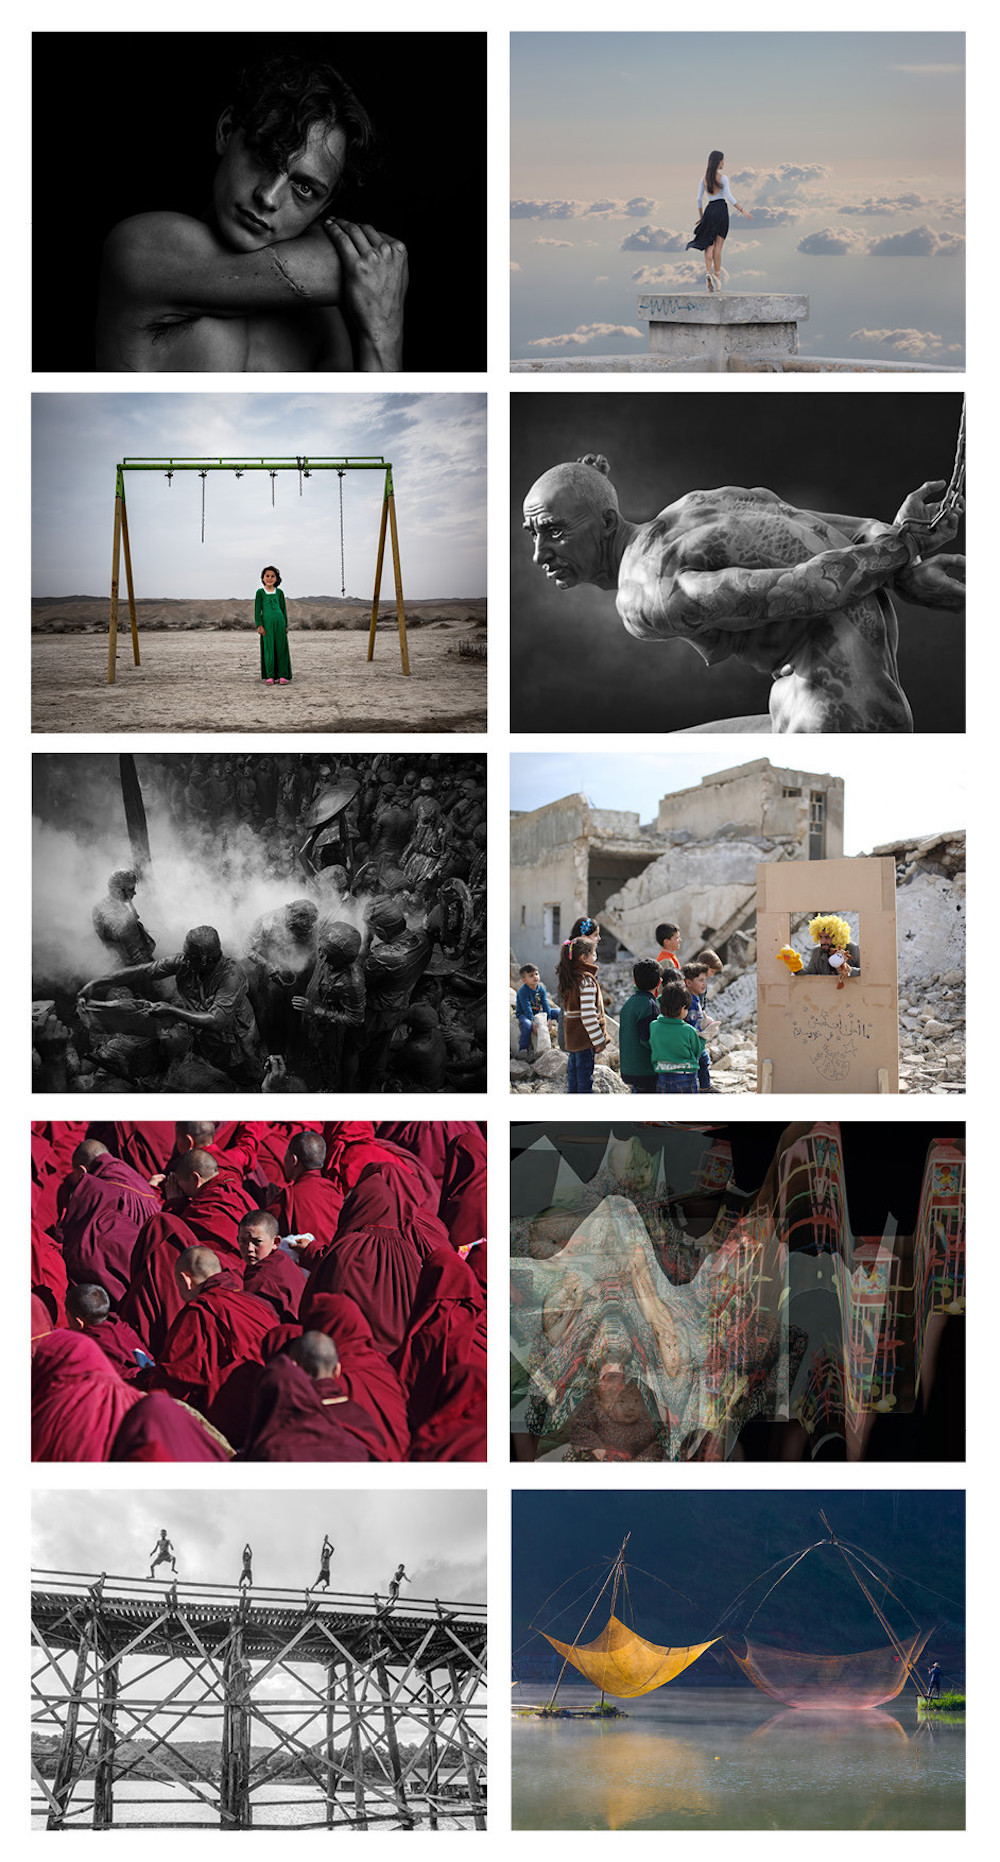 A collage of the work of previous Unpublished Photo contest prize winners